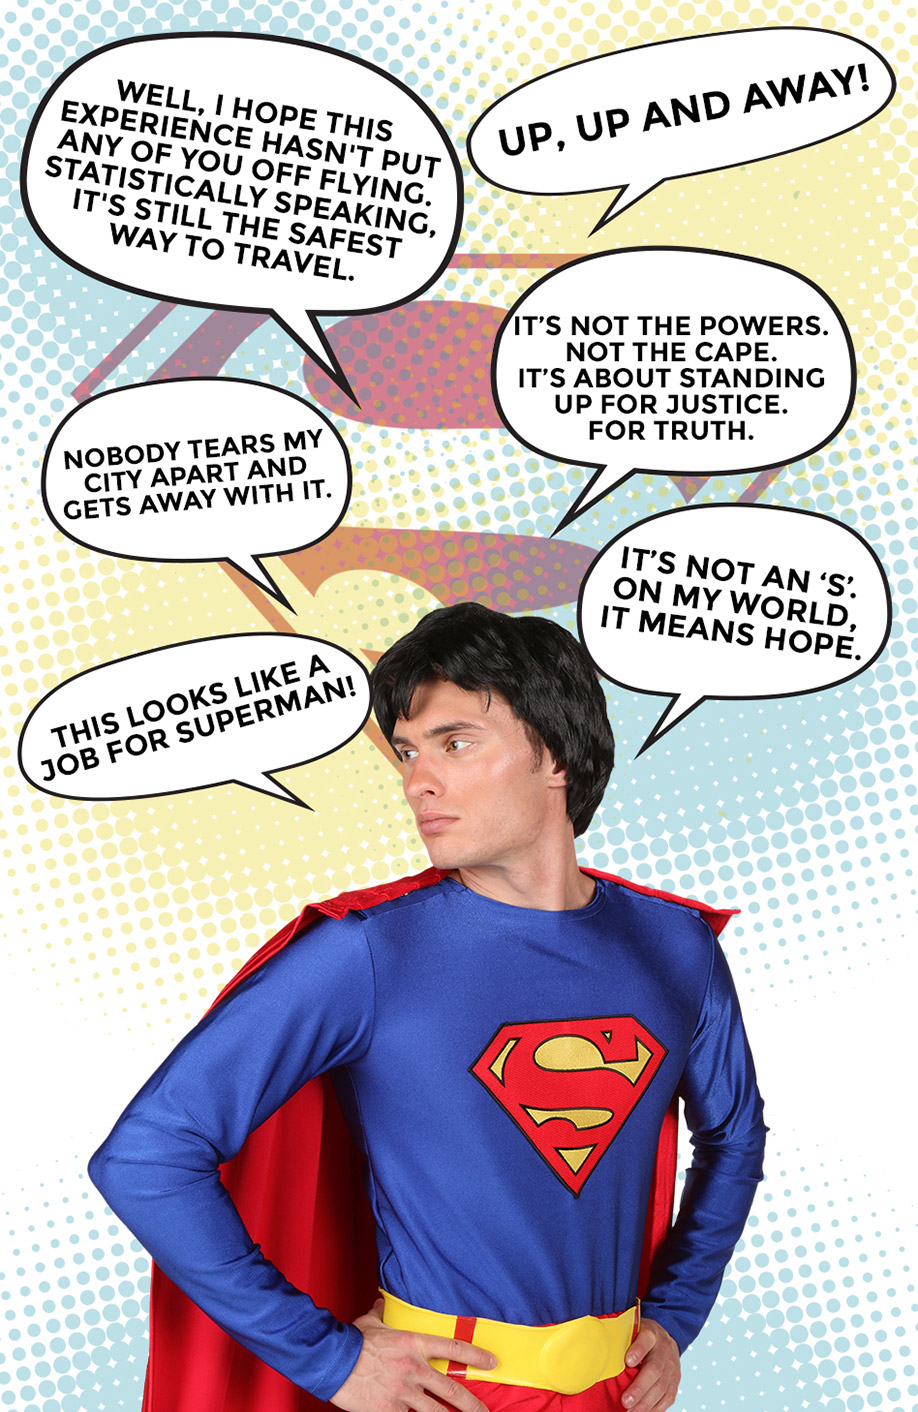 Superman Sayings and Quotes